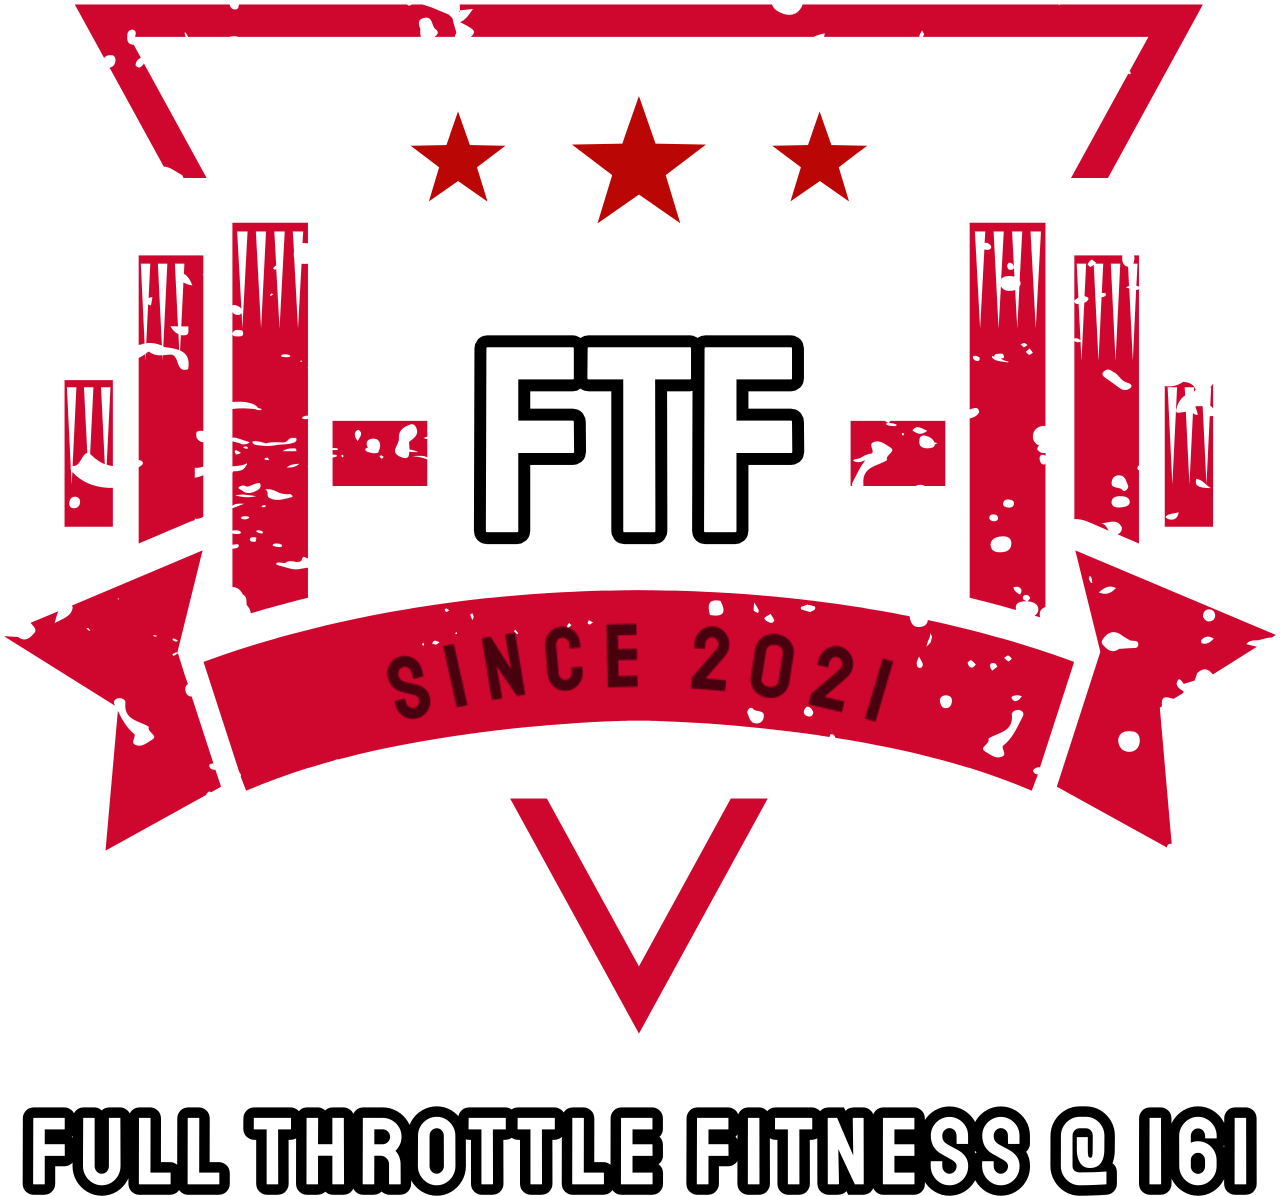 FULL THROTTLE FITNESS @ 161's web page